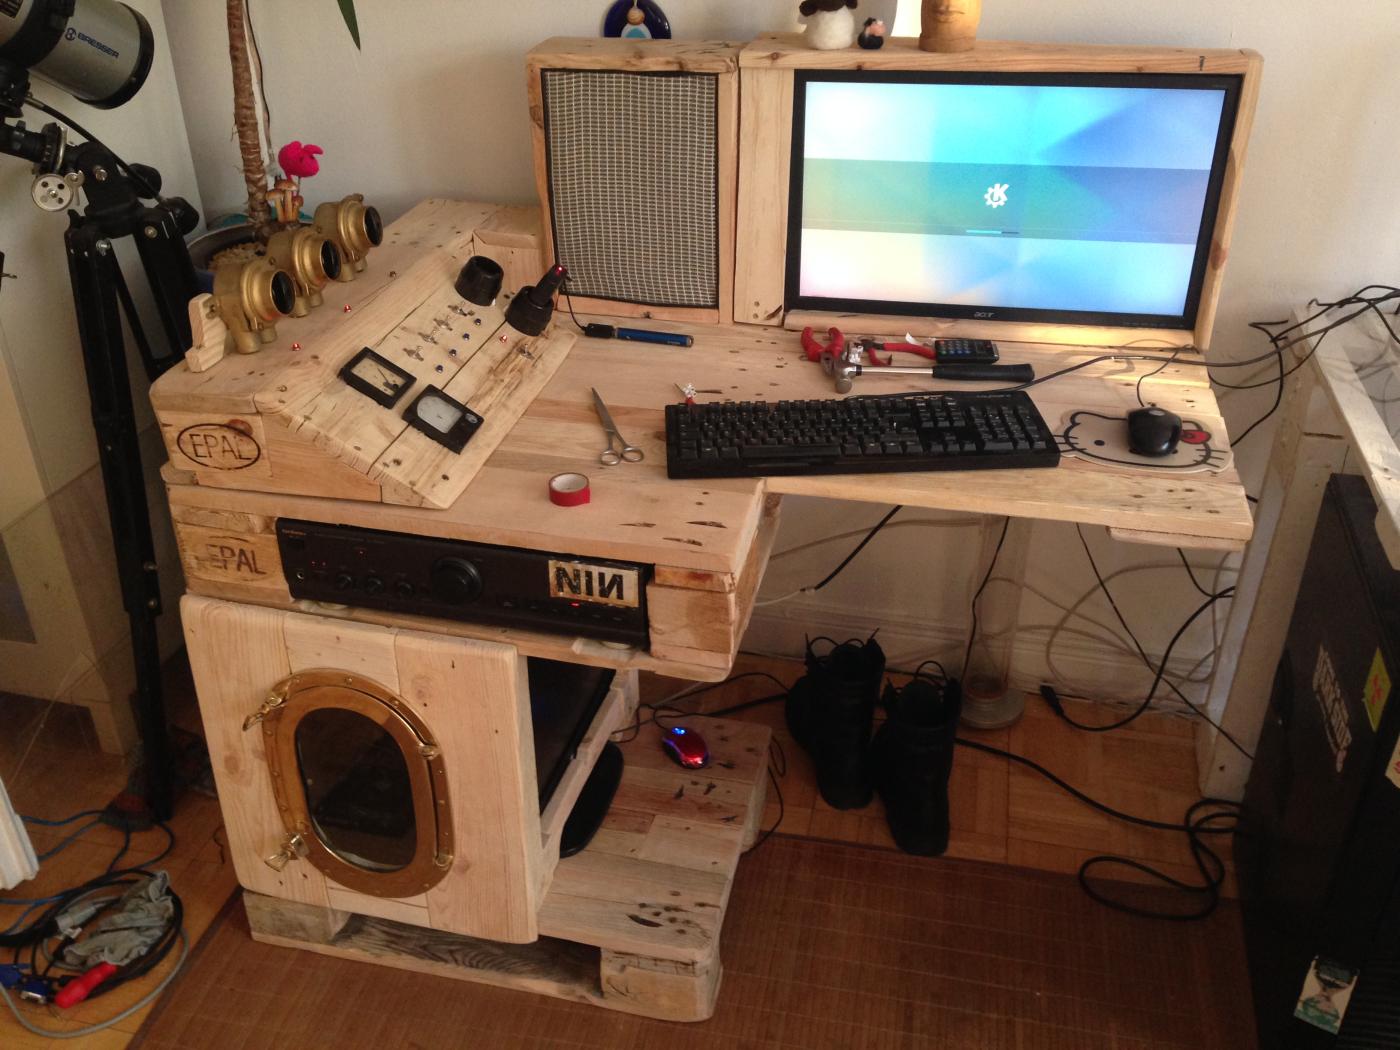 Steampunk desk completed with Tor server, Part 1